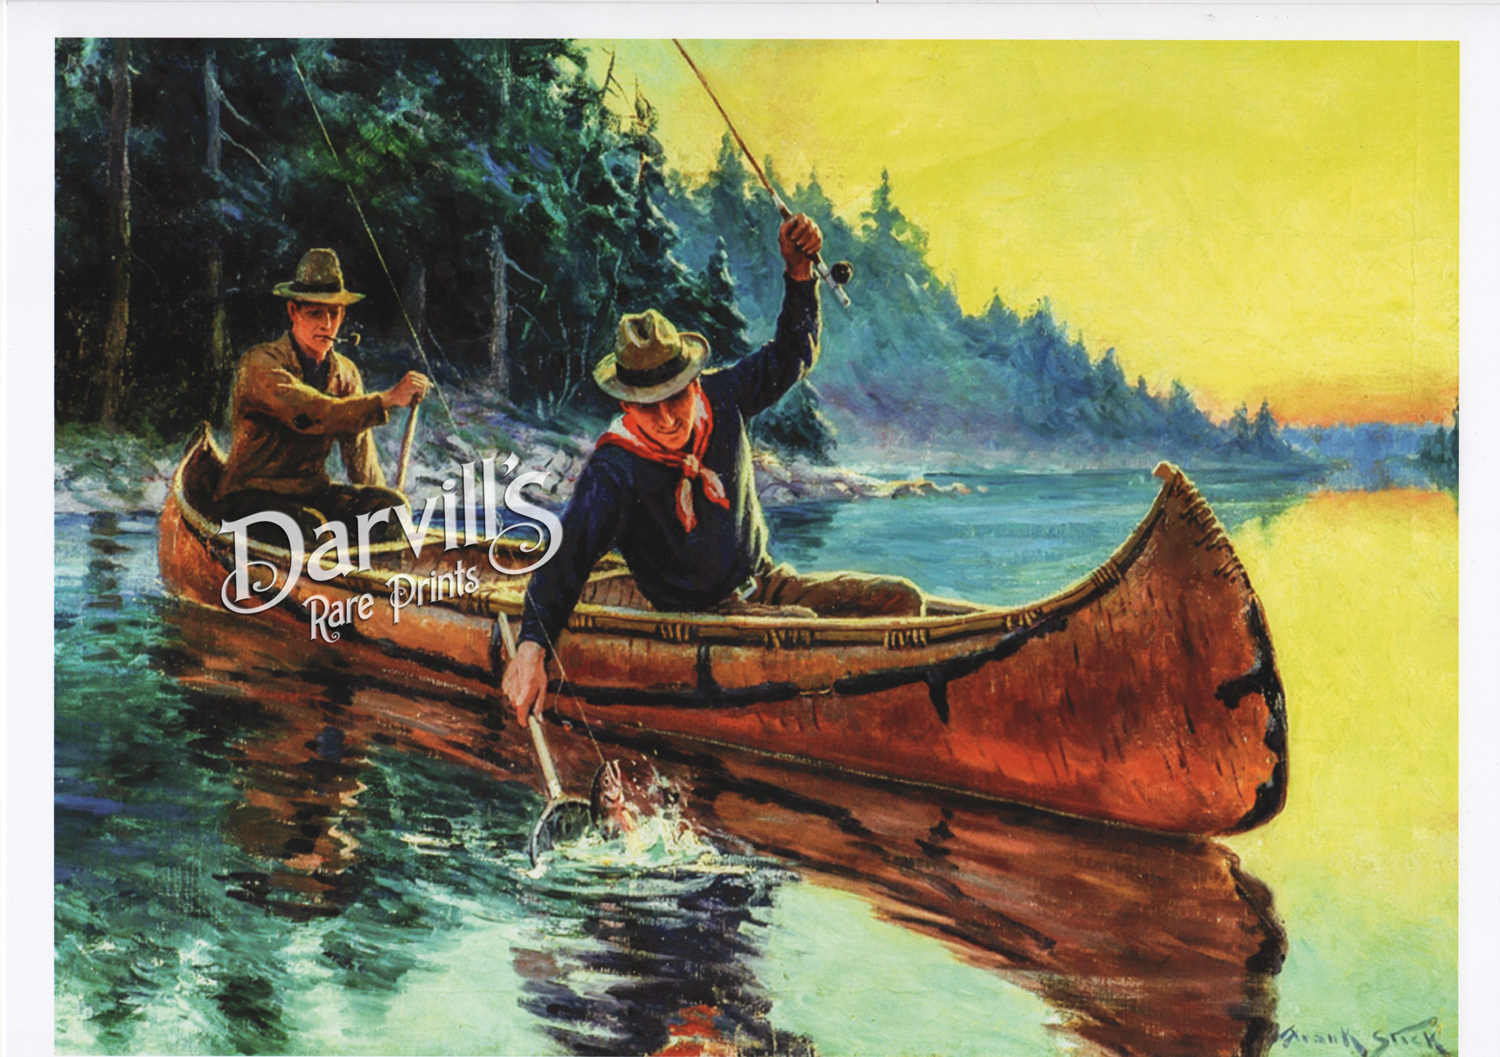  Red Canoe Fly Fishing Art Print by Artist DJ Rogers: Posters &  Prints